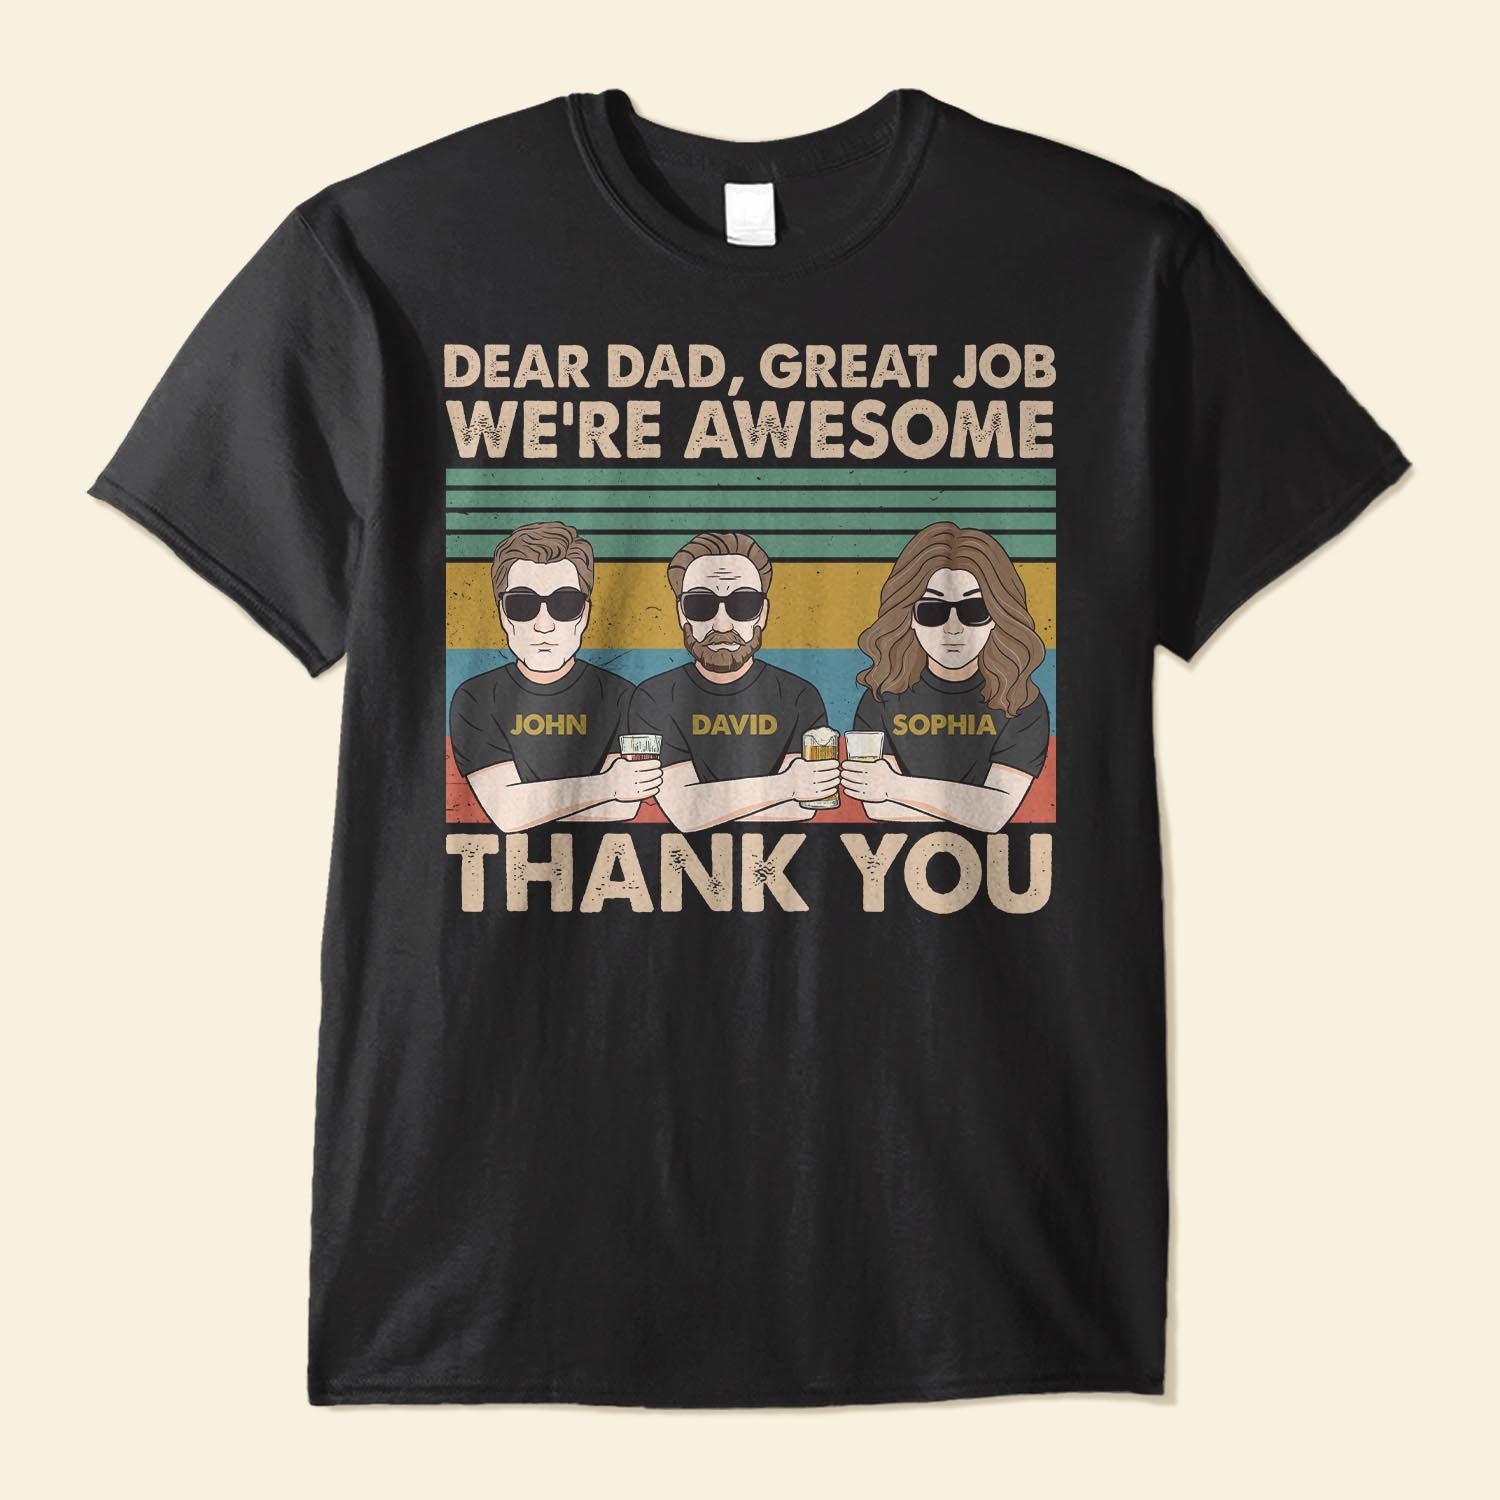 Dear Dad, Great Job We're Awesome Thank You  - Personalized Shirt